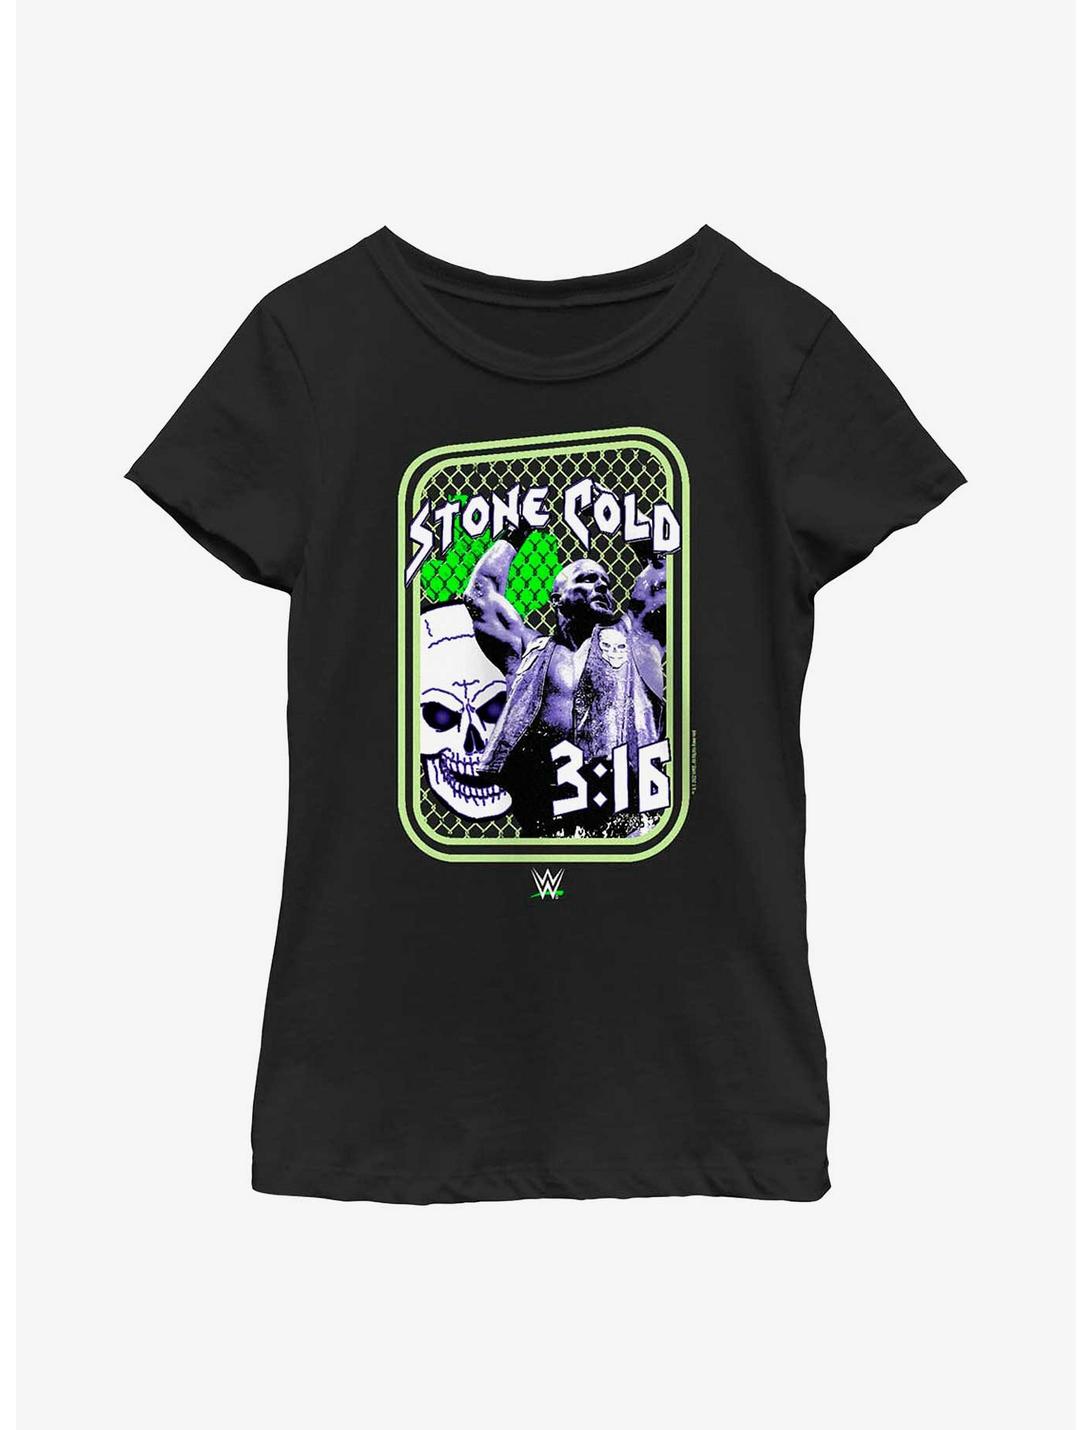 WWE Stone Cold Steve Austin Steel Cage Youth Girls T-Shirt, BLACK, hi-res